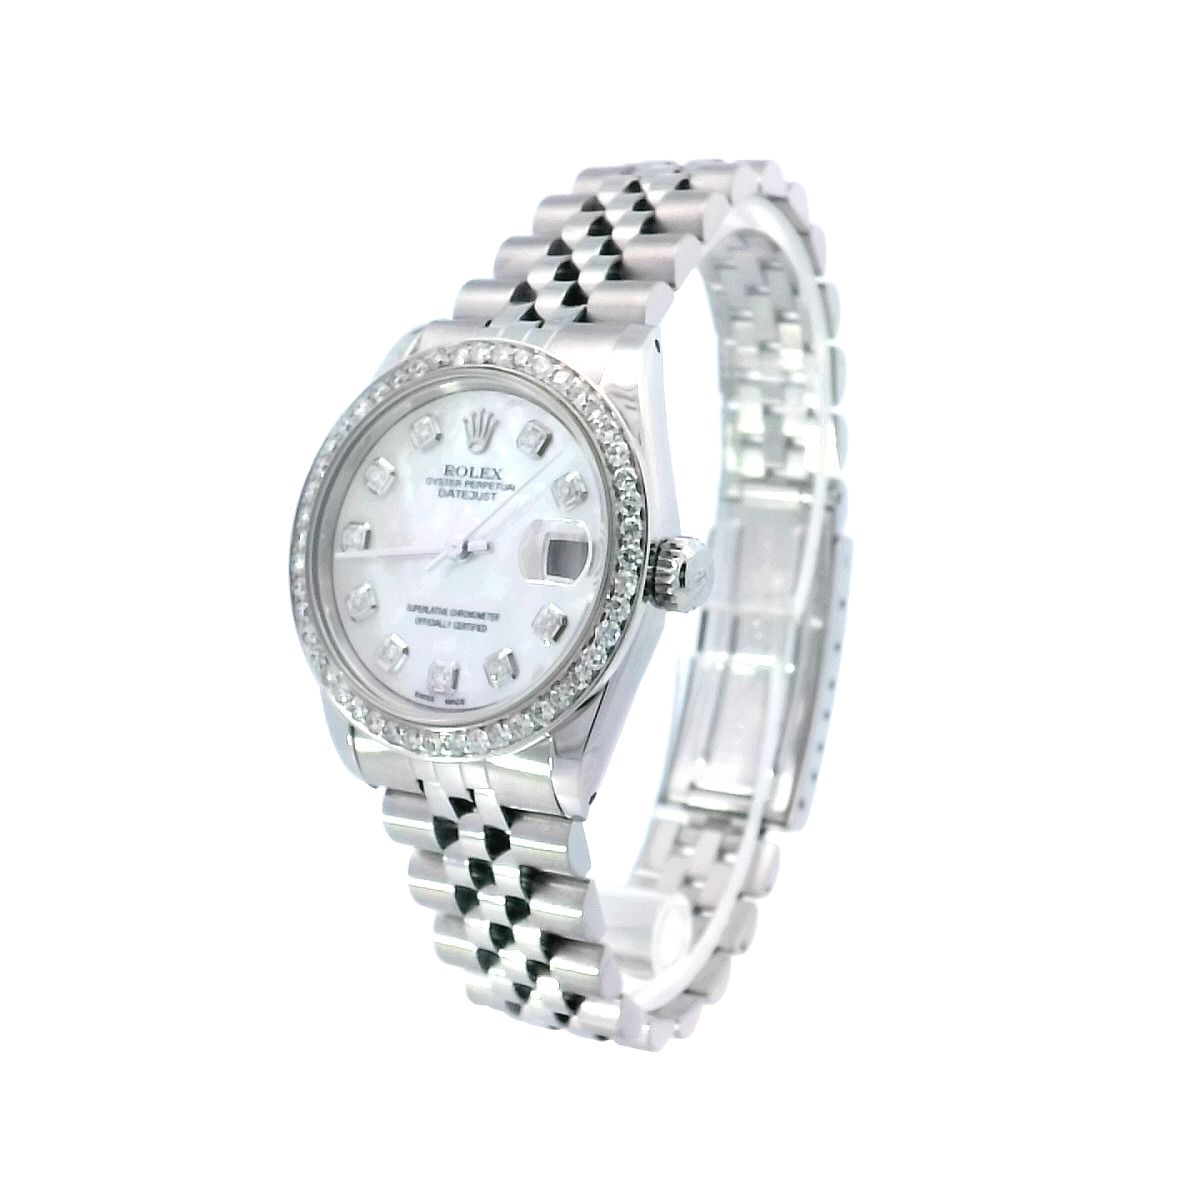 Rolex Datejust Stainless Steel 31mm Custom White MOP Diamond Dial Watch Reference #: 68274